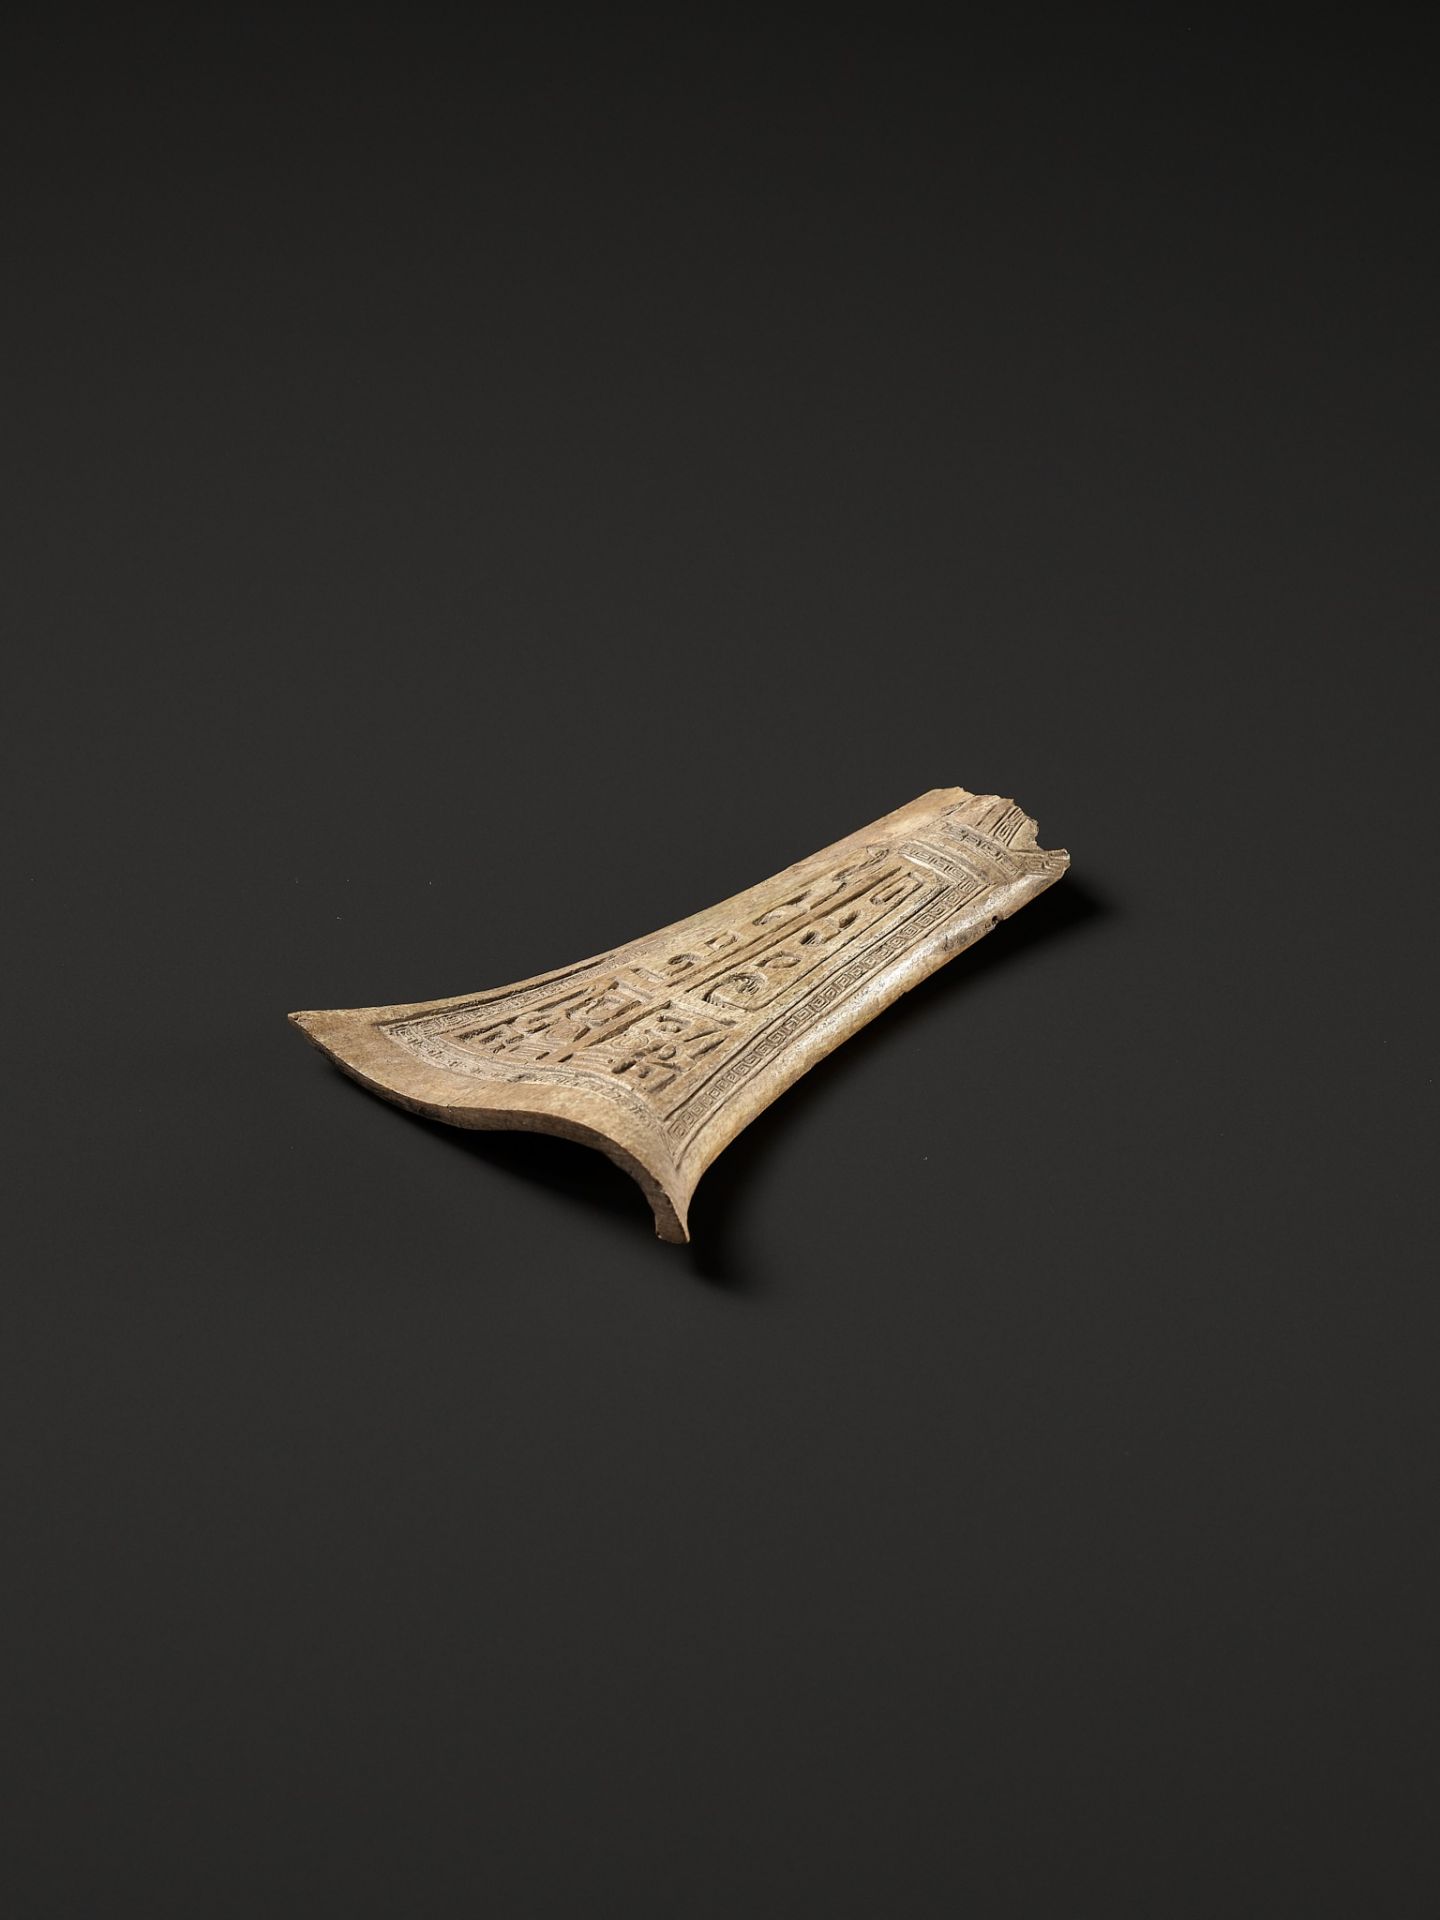 AN ARCHAIC CEREMONIAL BONE CARVING, SHANG DYNASTY - Image 2 of 16